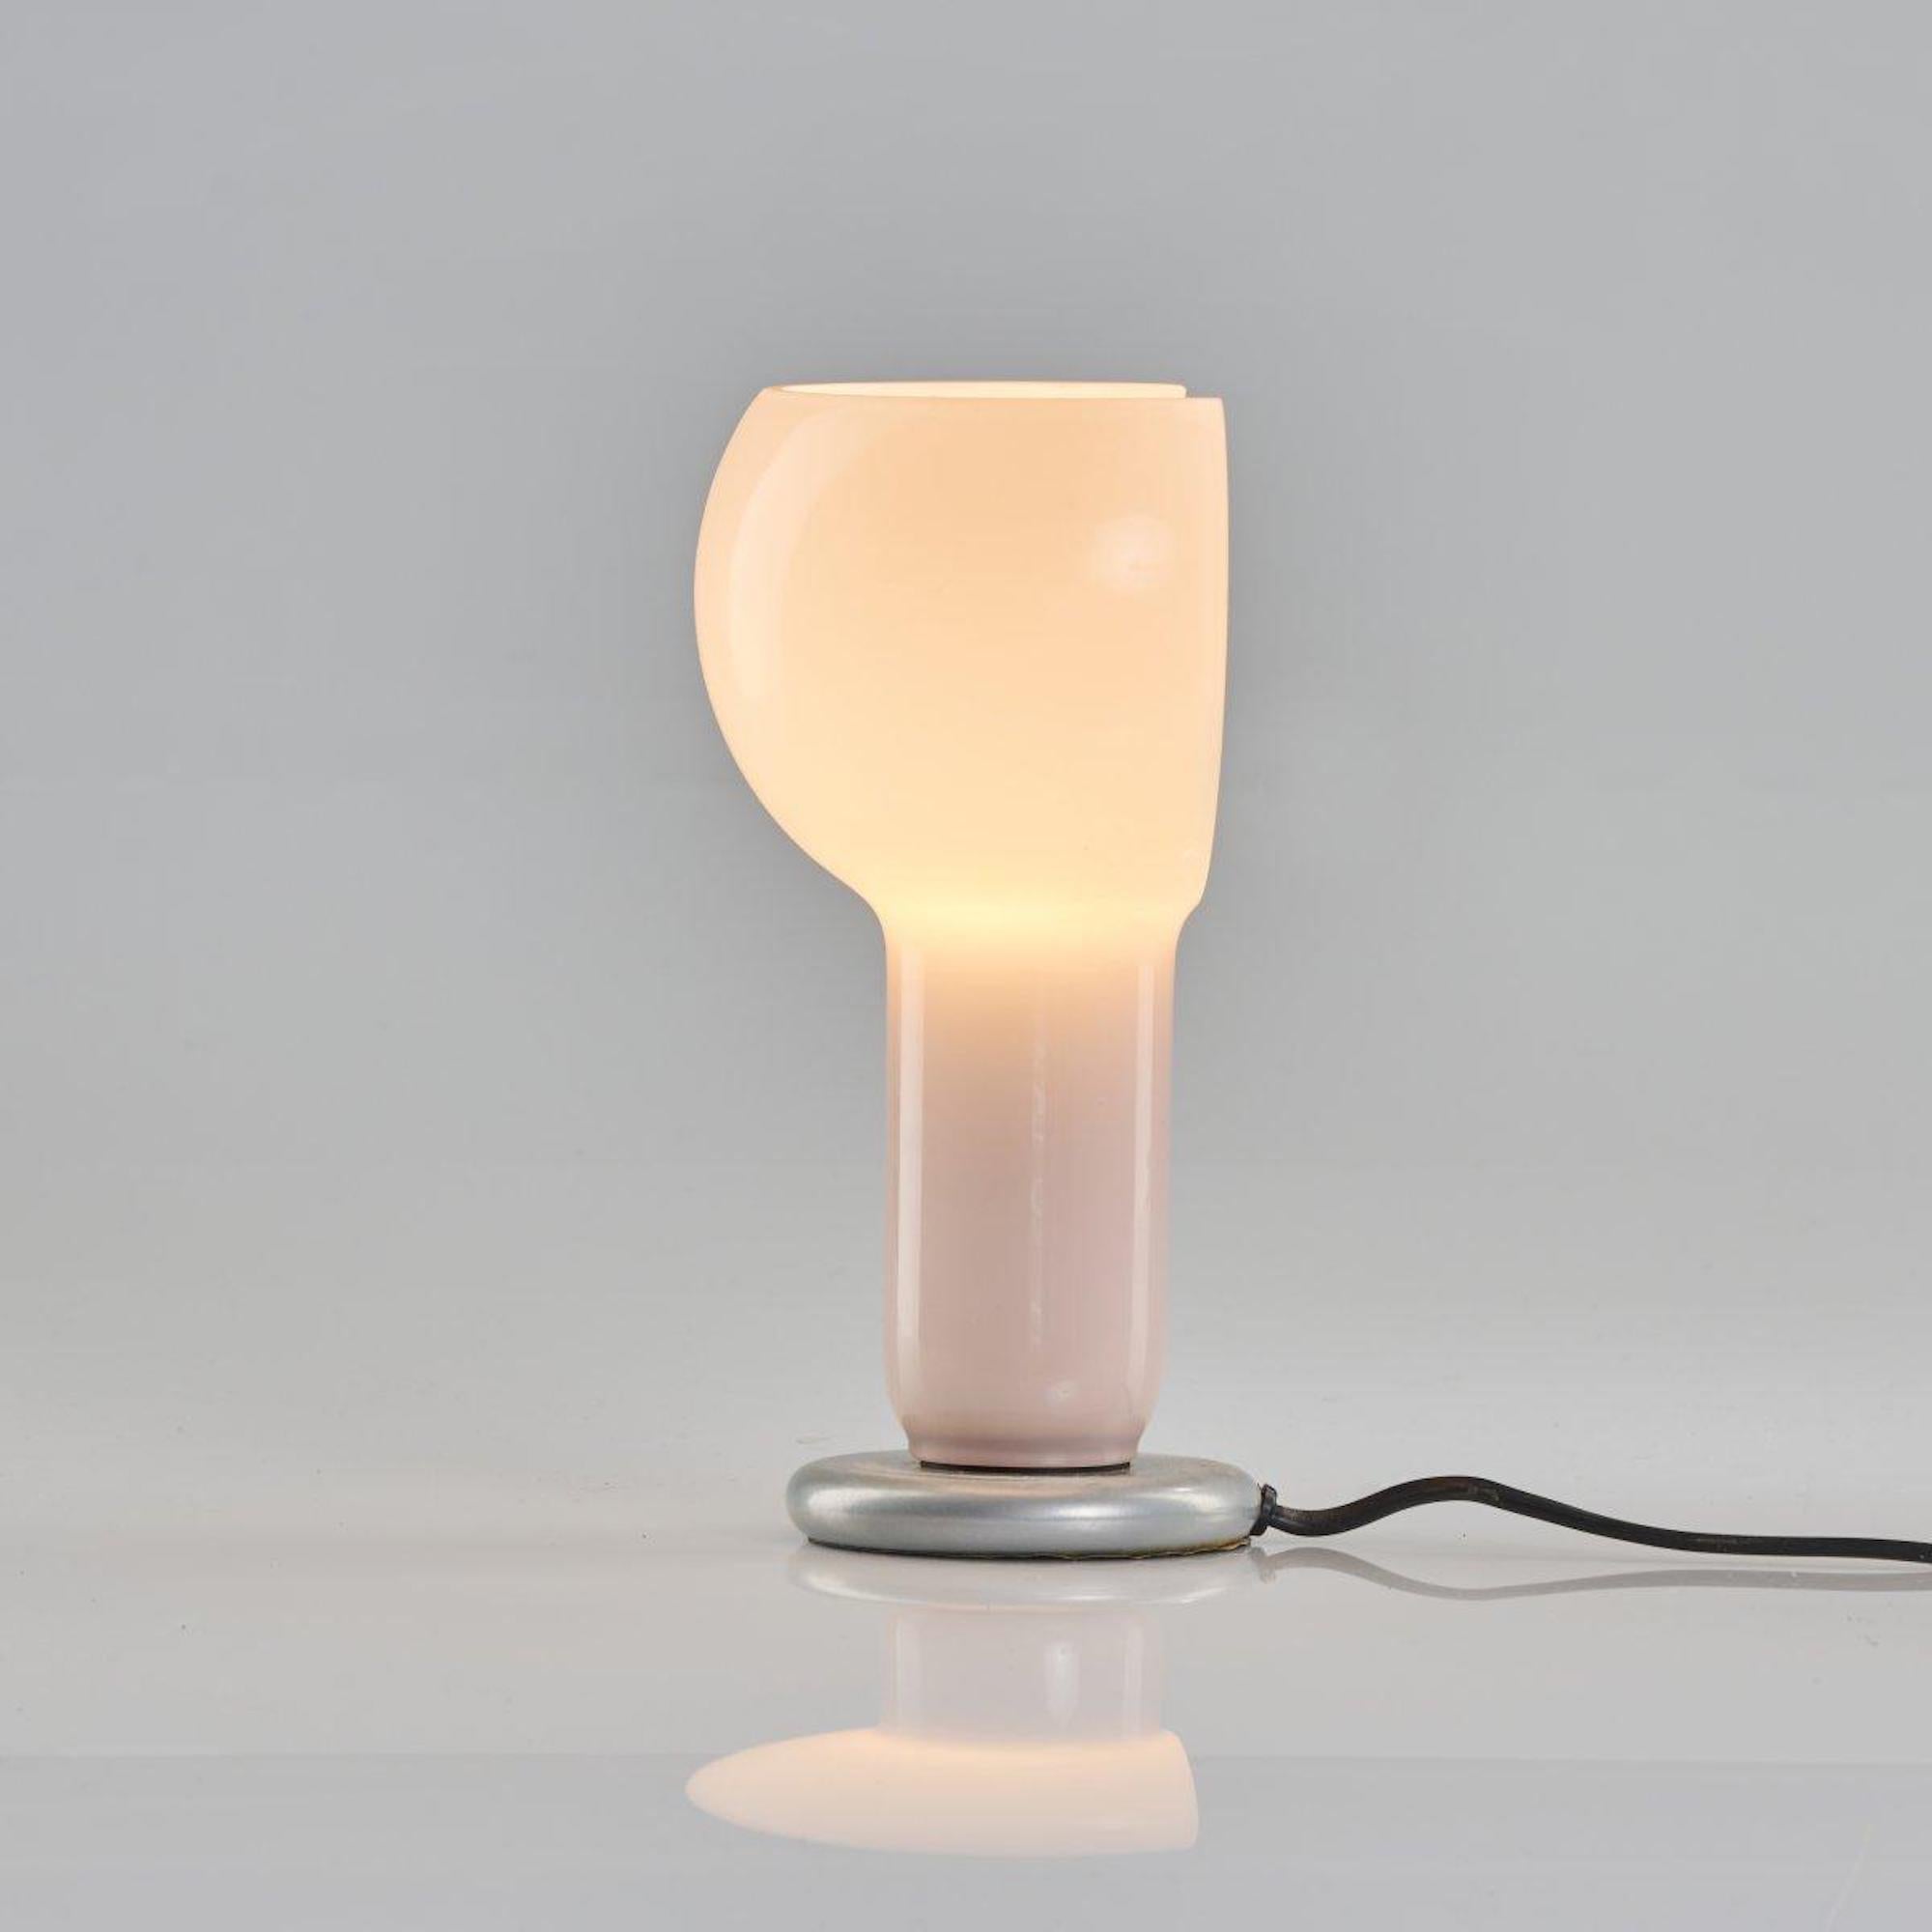 Miniflash table light realized by Joe Colombo in 1968.

H. 20.5 cm. Made by Oluce, Milan.

Glass, pink and white, cast metal, painted grey. Marked: manufacturer's label.

Ref. Gramigna, Repertorio 1950 - 1980, Milan 2001, p. 190; Kries/ Favata, Joe